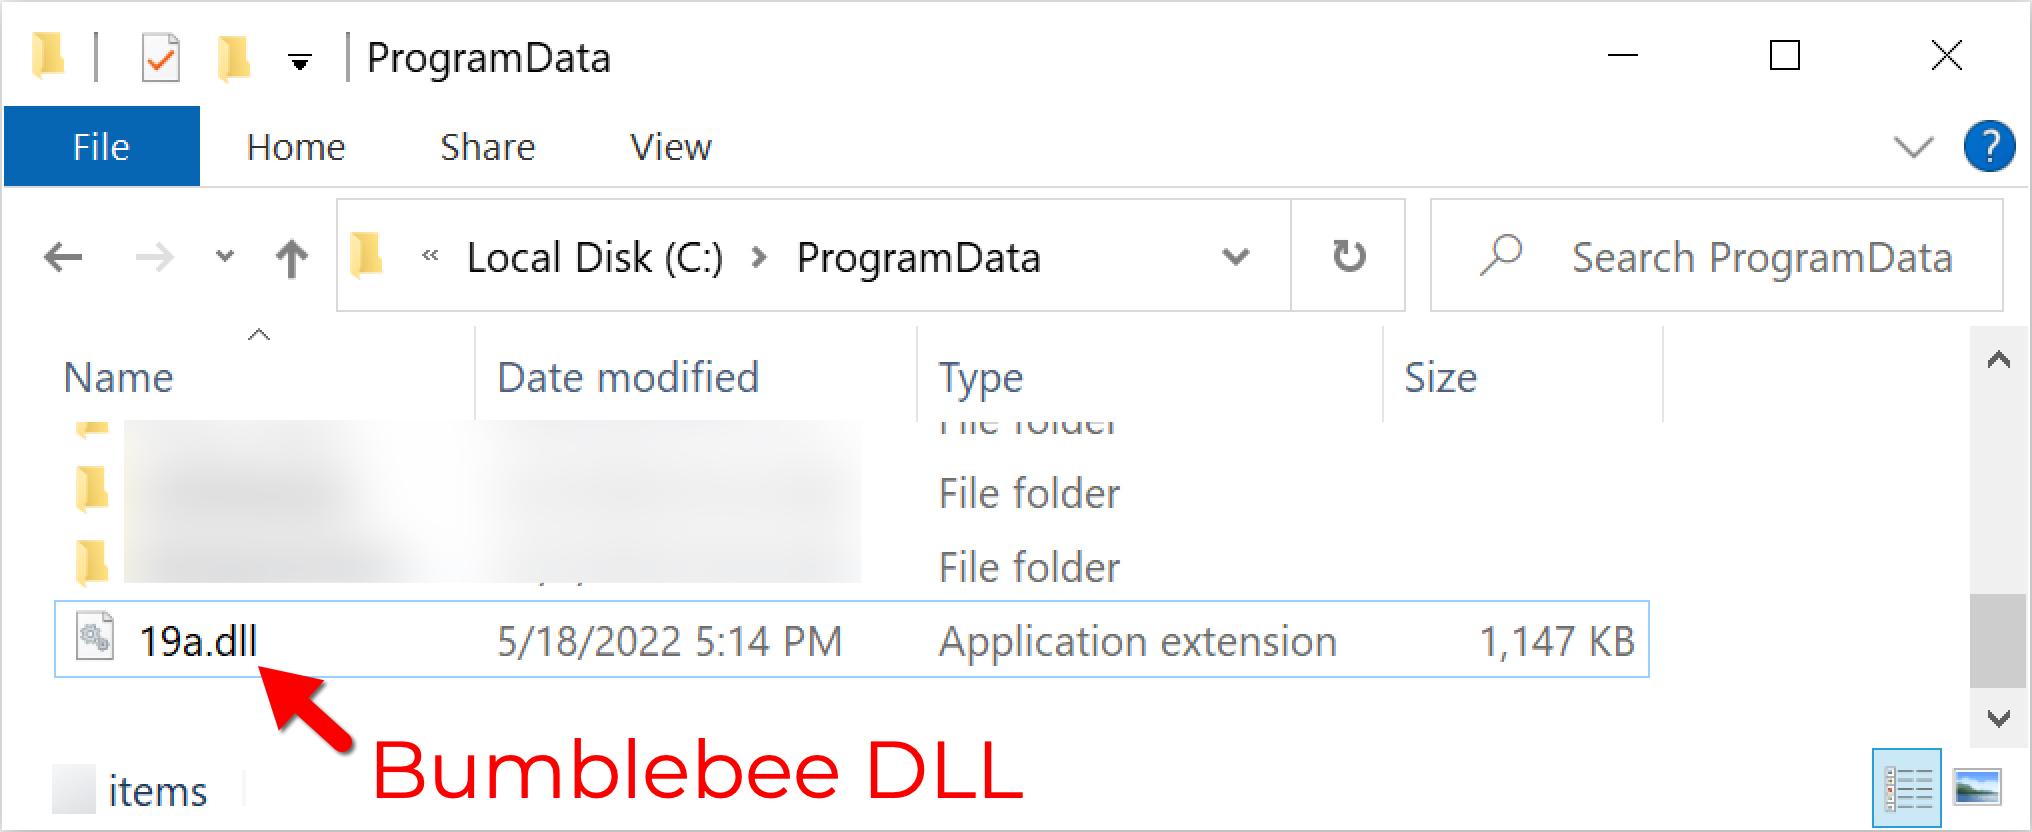 The extracted Bumblebee DLL file is saved to C:\ProgramData\19a.dll. The Bumblebee DLL is shown in the image by the large red arrow. 